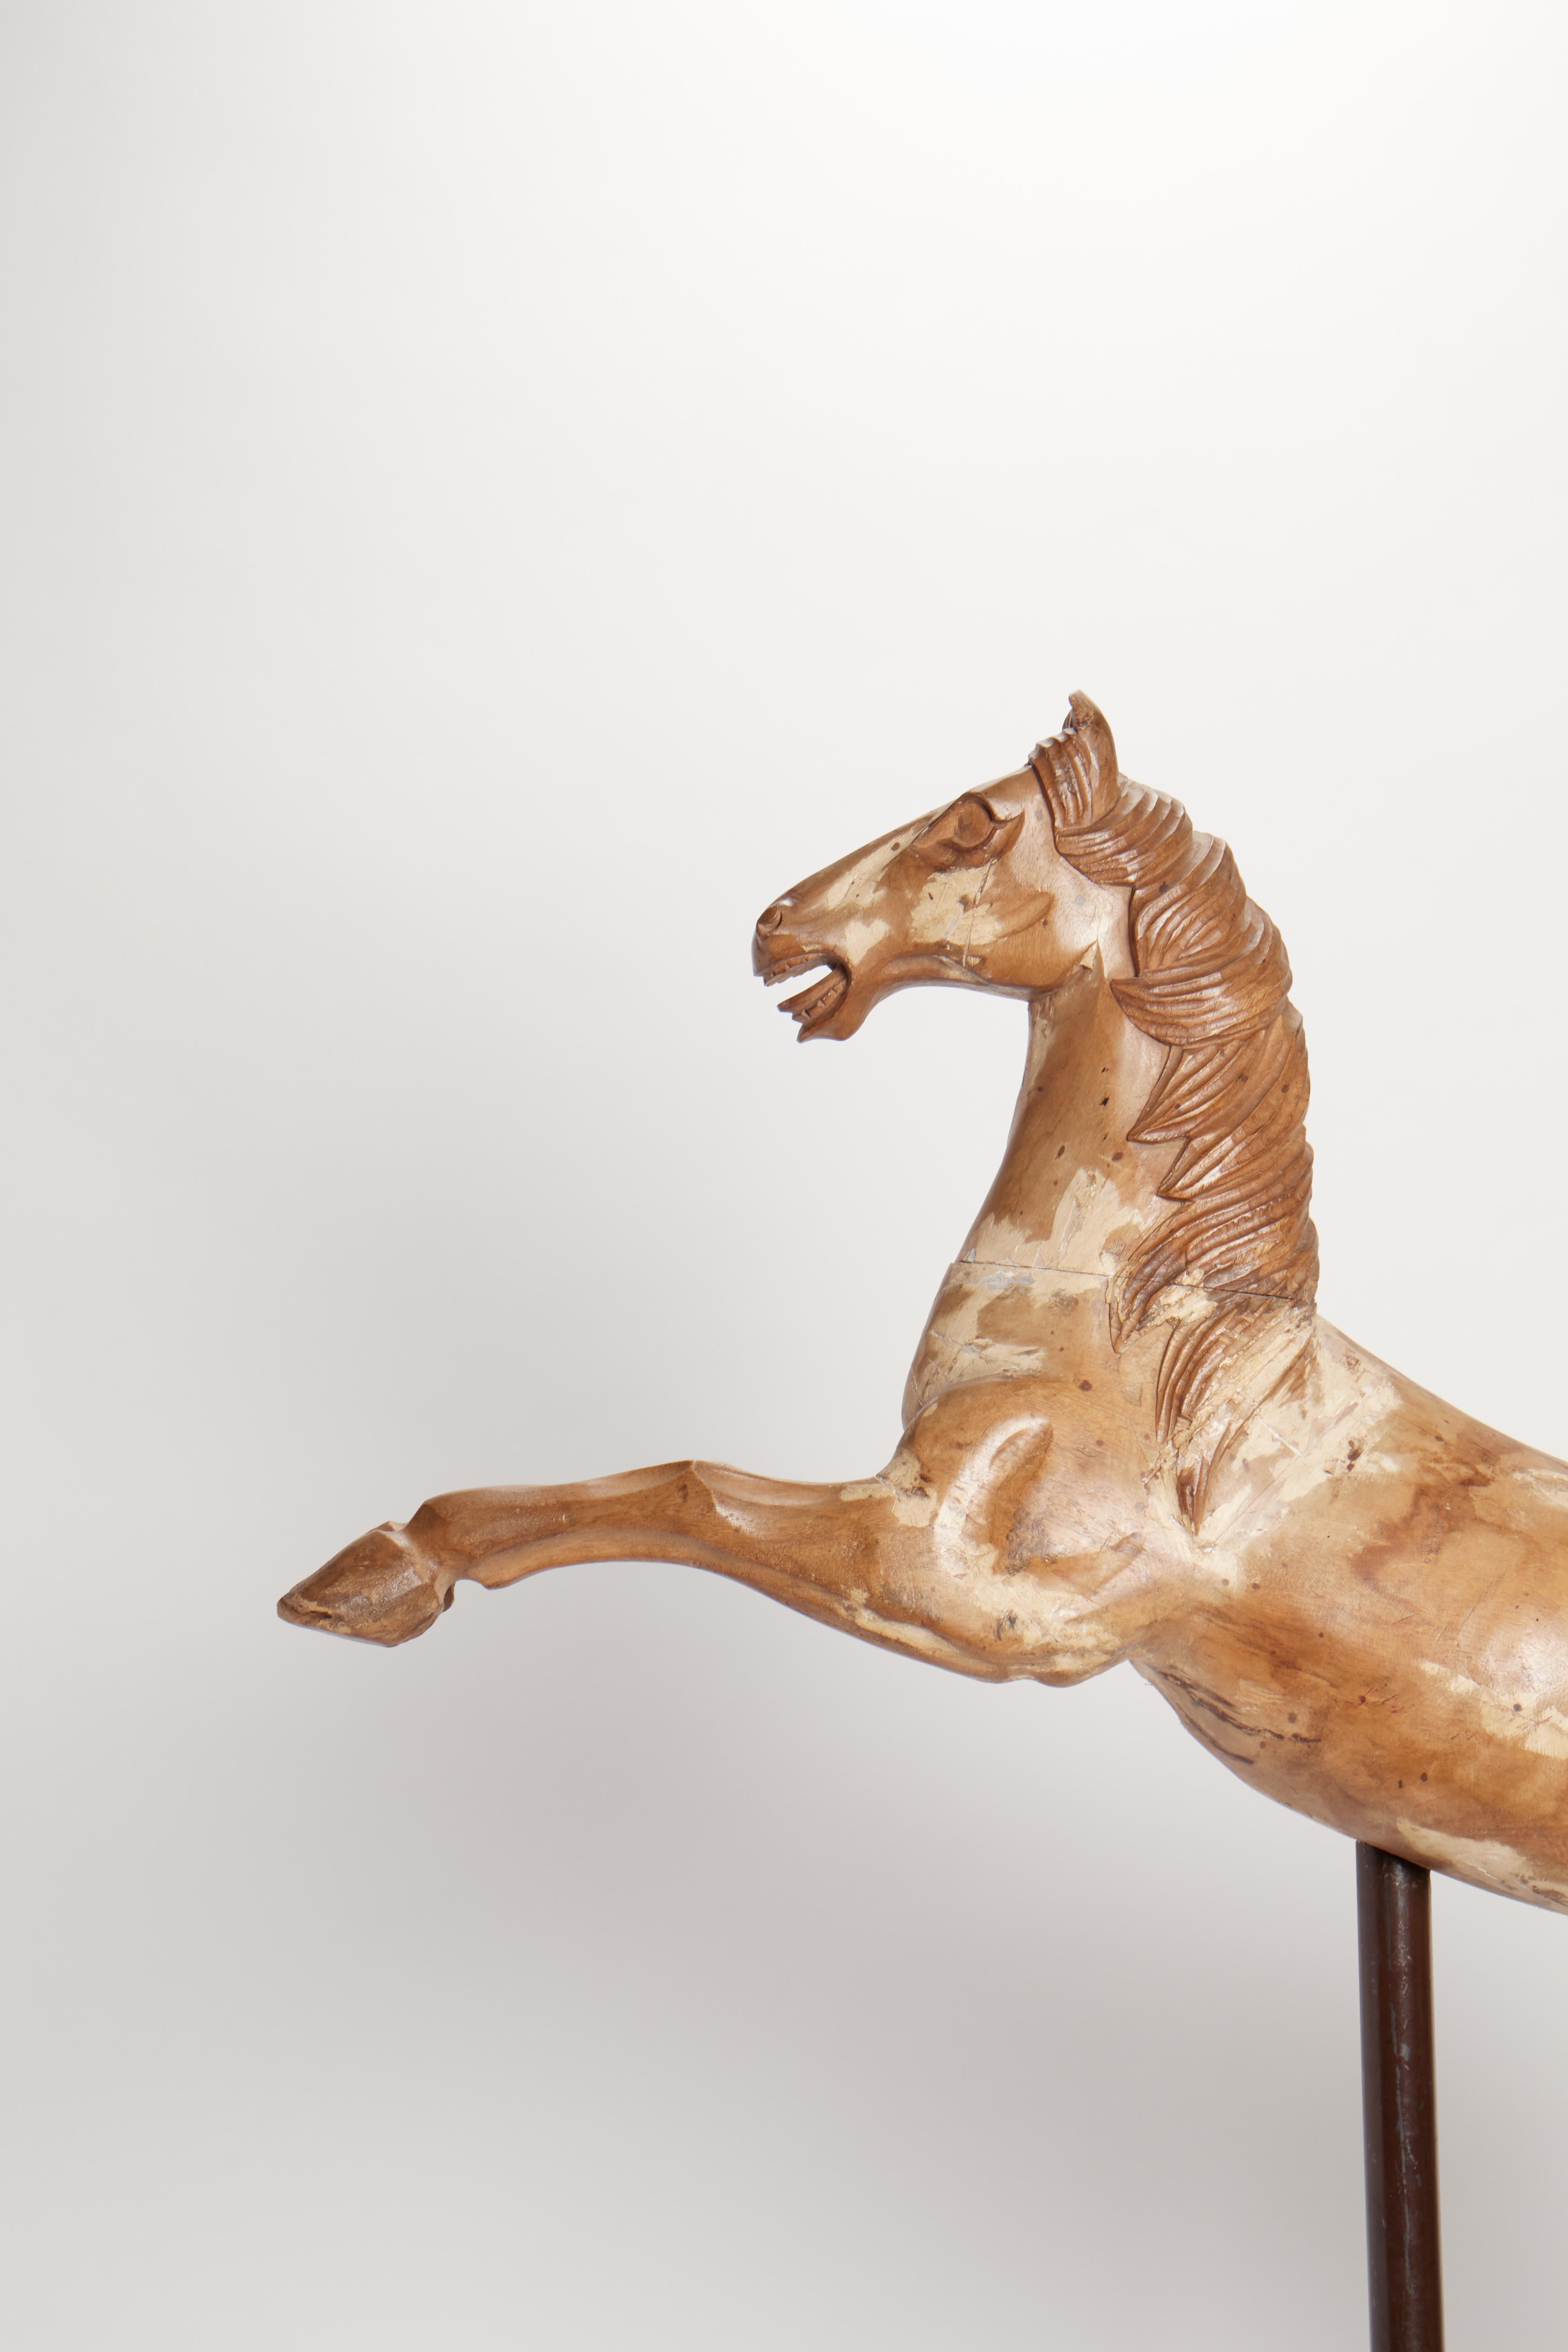 An Italian wooden sculpture of a rampant carousel horse. Modern metal base. Measure refers to the horse only, Italy, circa 1750.